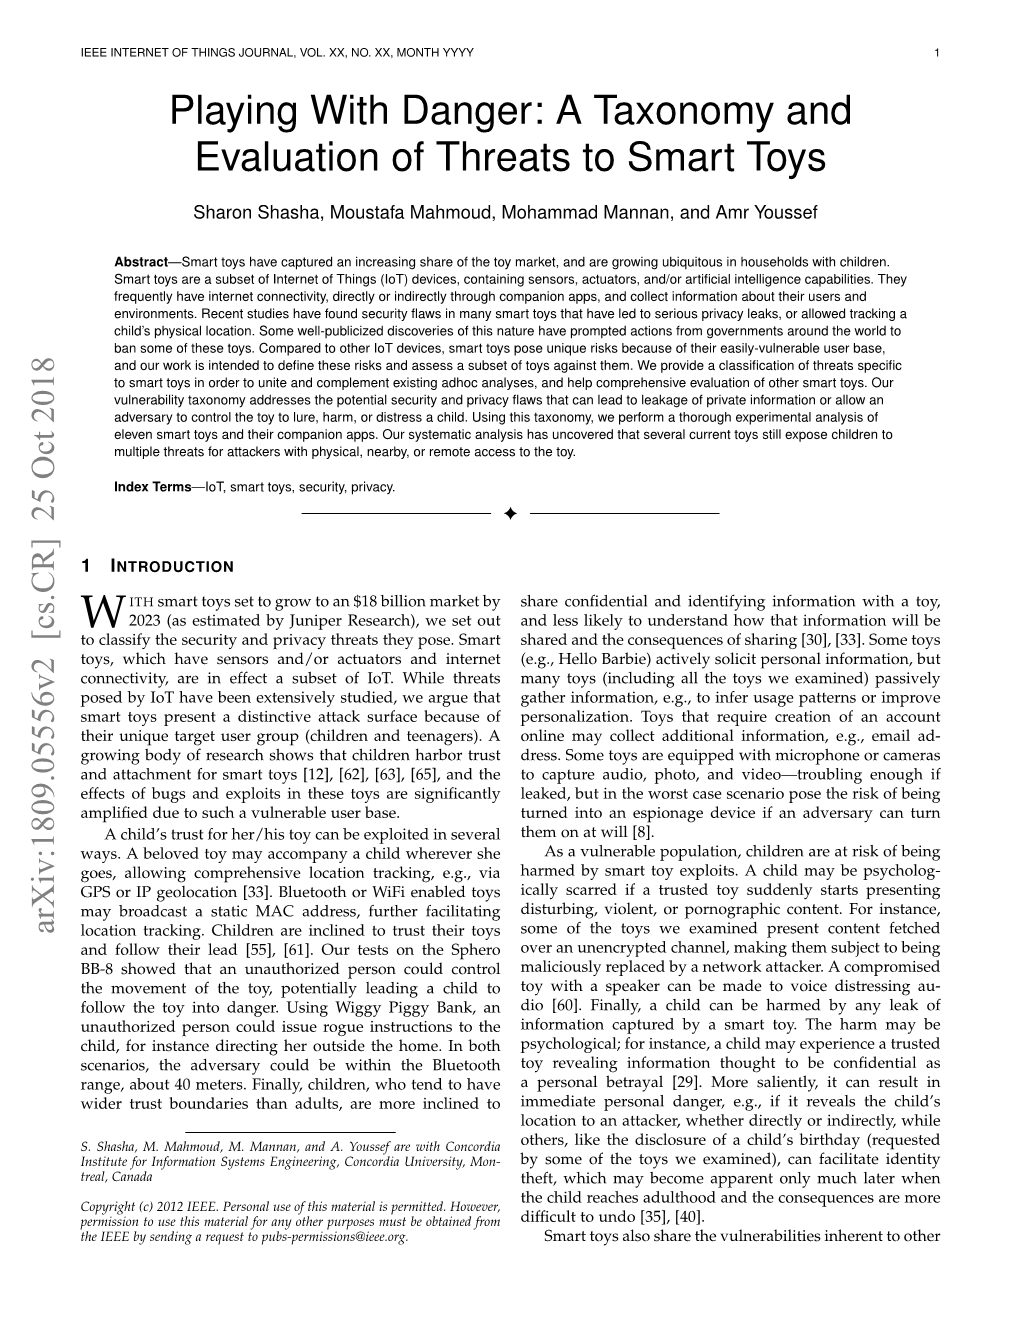 A Taxonomy and Evaluation of Threats to Smart Toys